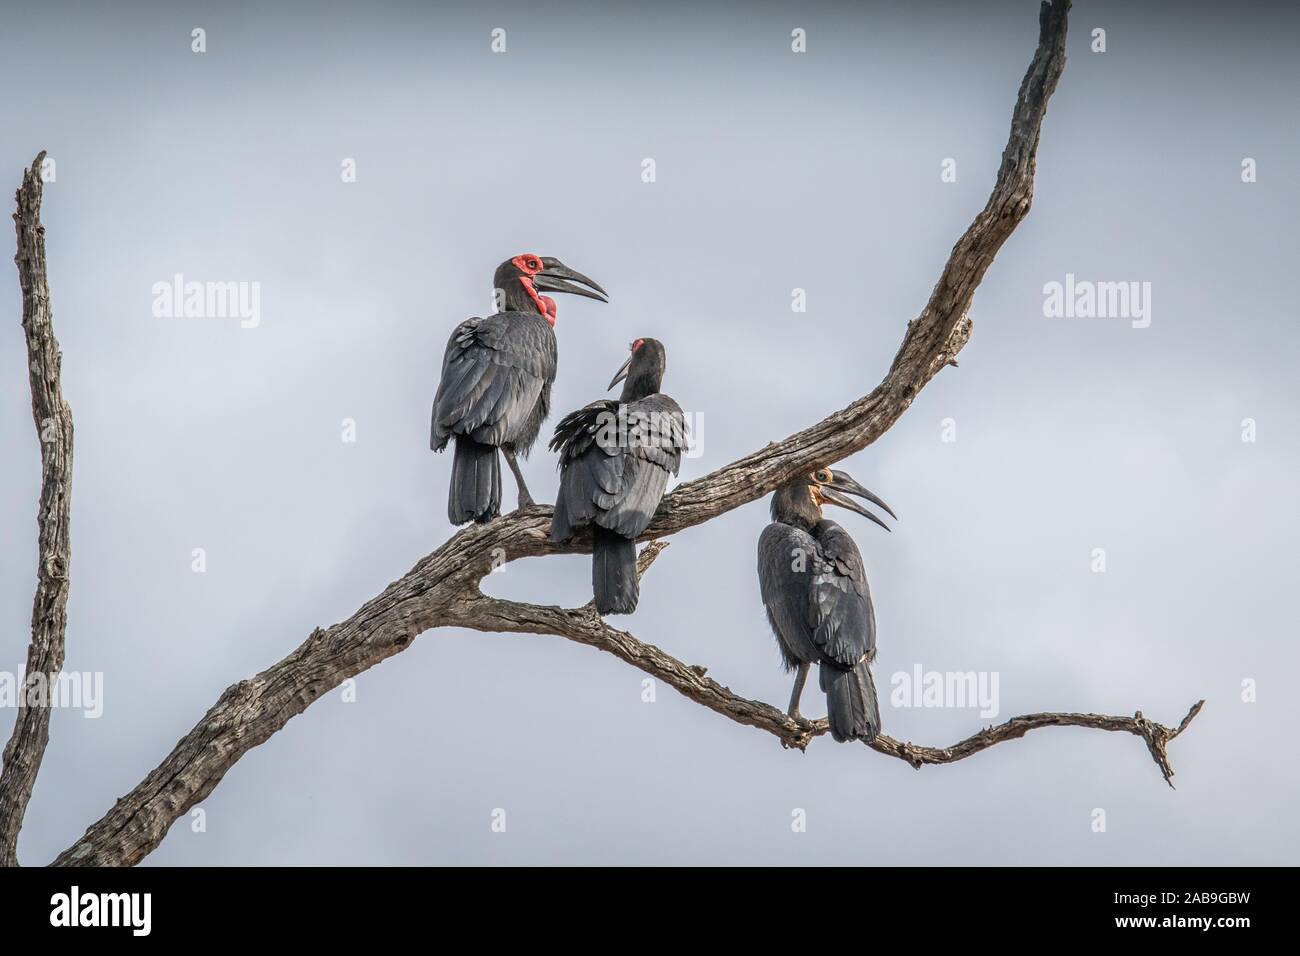 Three Southern ground hornbills in a tree in the Kruger National Park, South Africa. Stock Photo